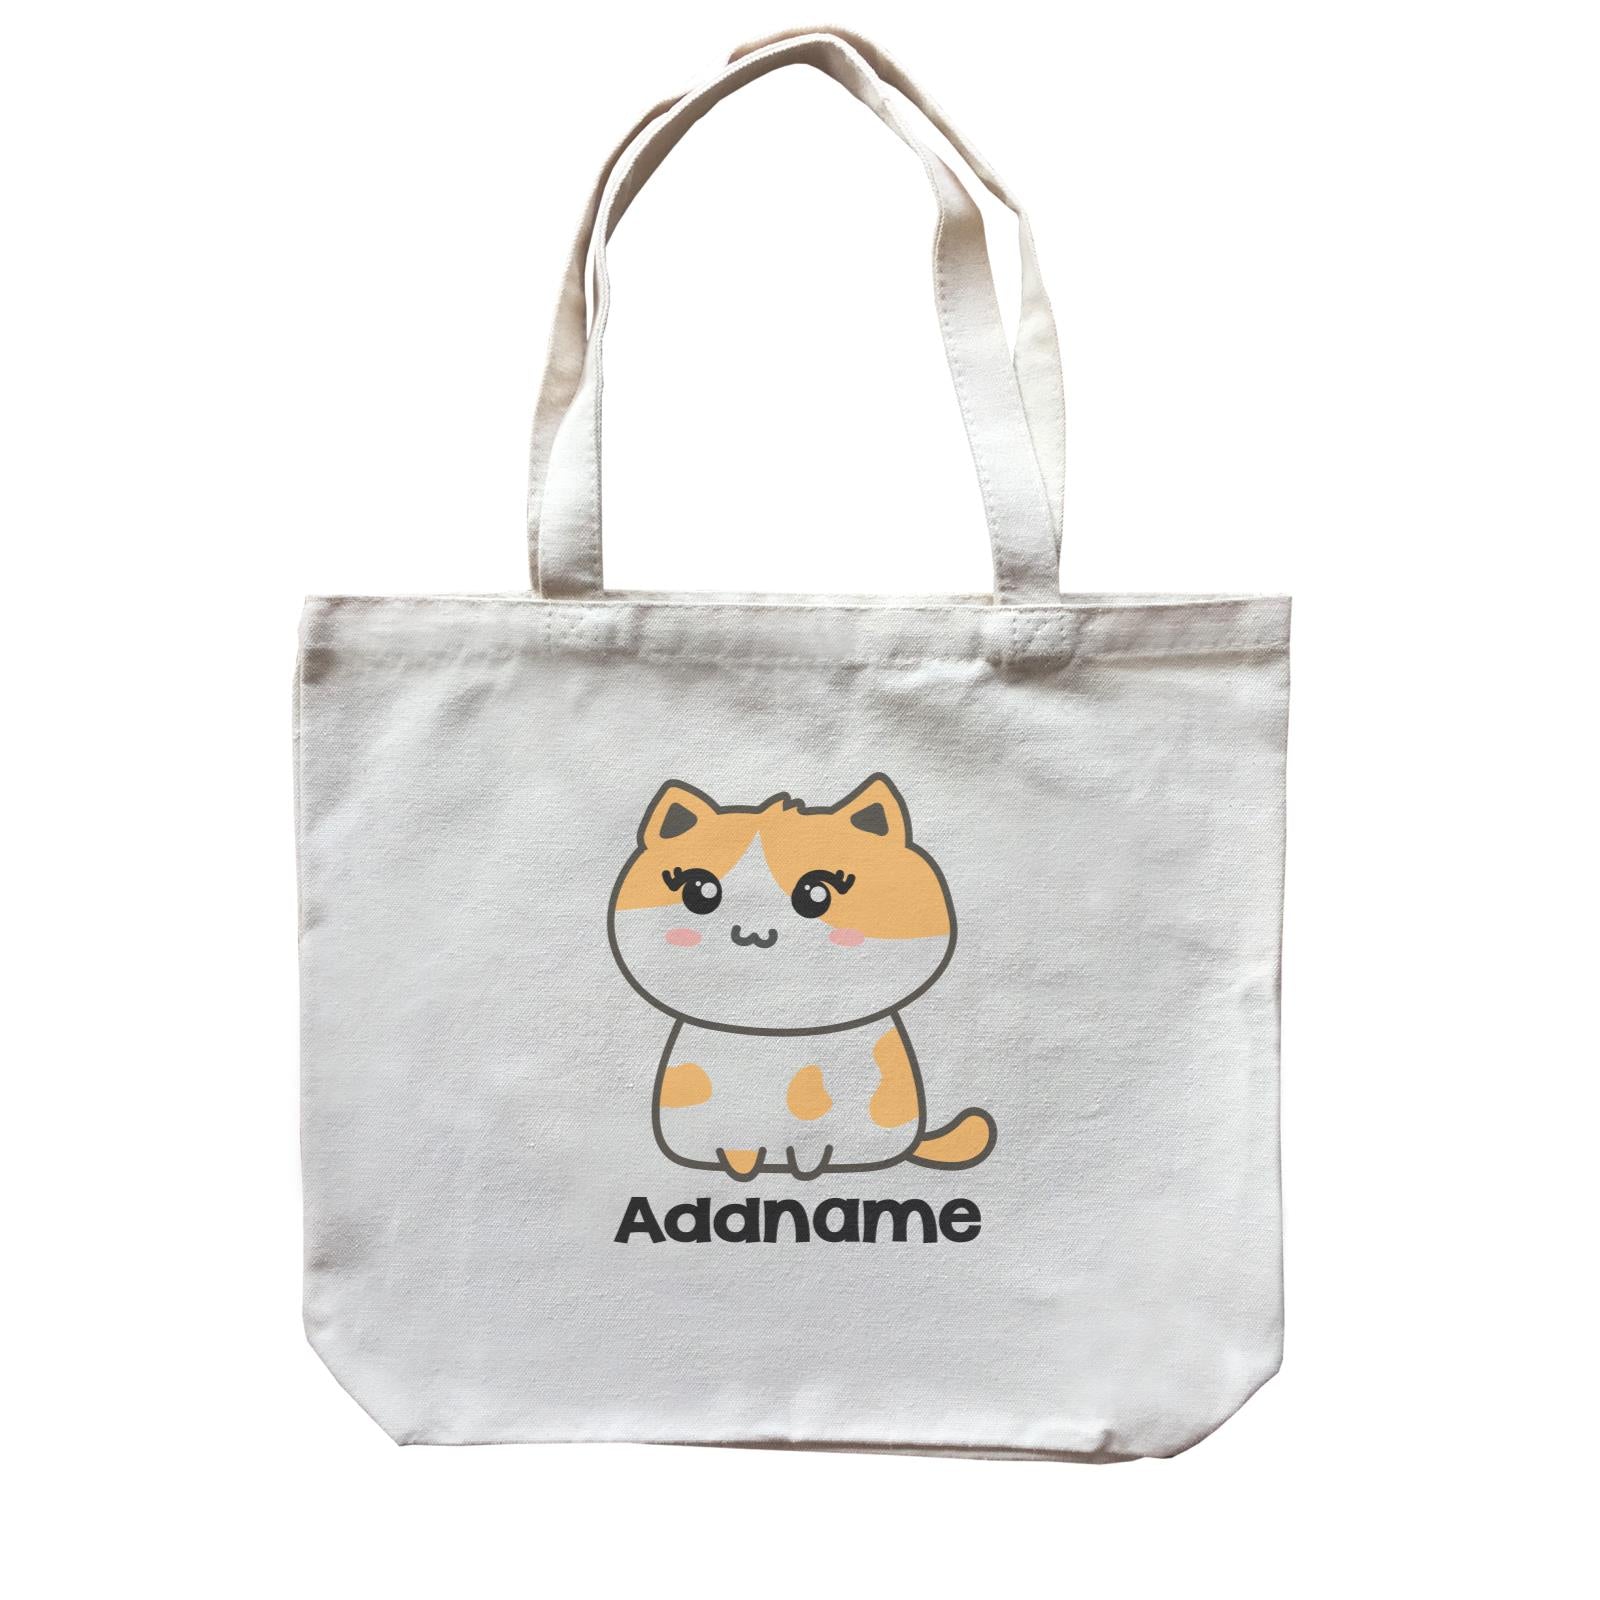 Drawn Adorable Cats White & Yellow Addname Canvas Bag